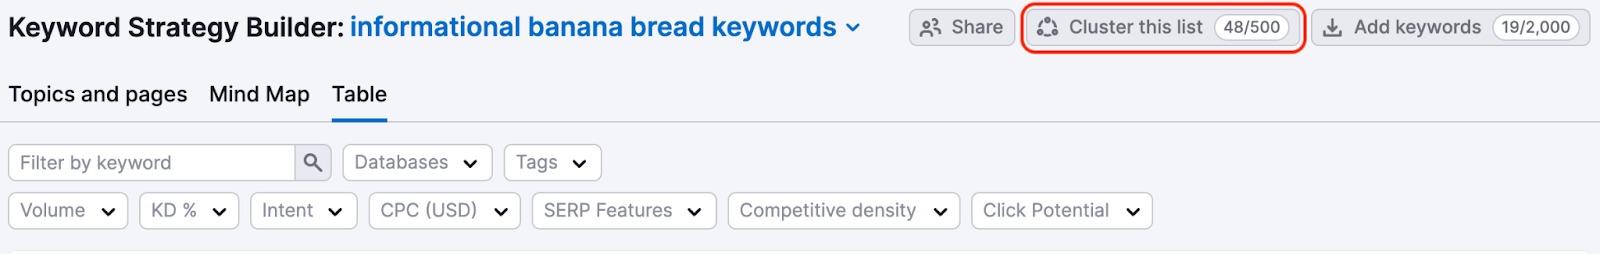 The Cluster this list button is highlighted in Keyword Strategy Builder. 